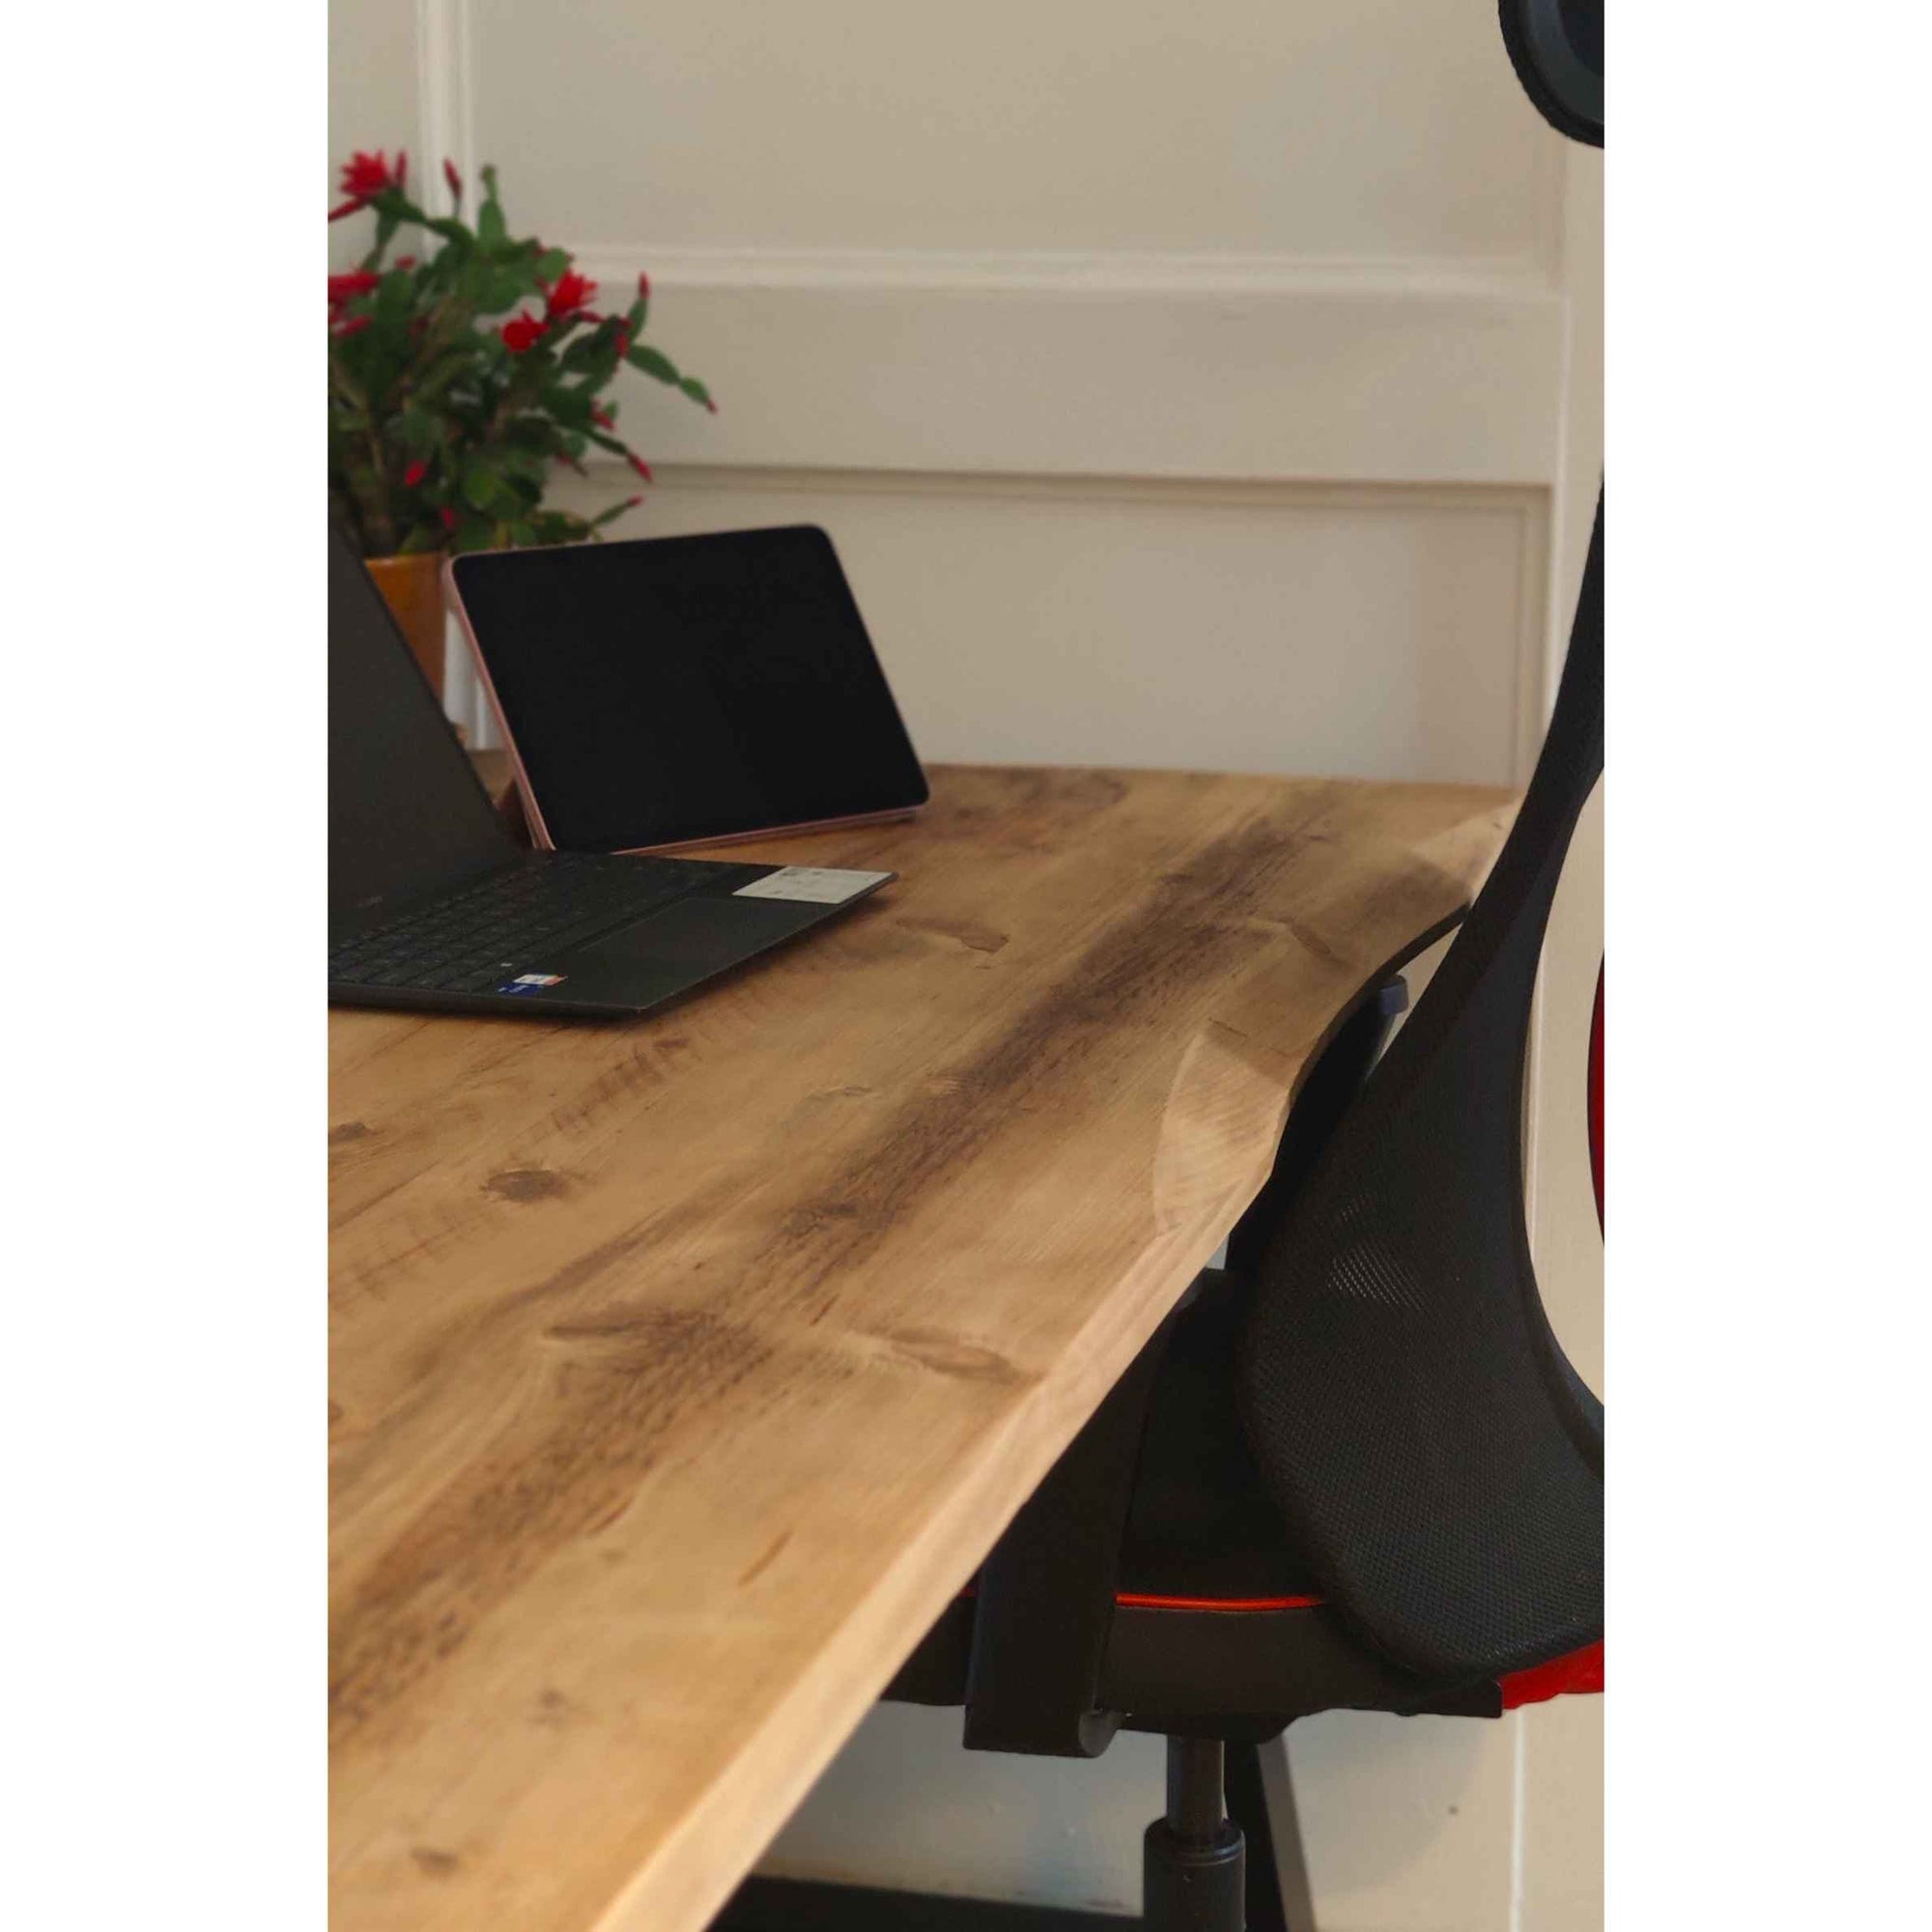 Reclaimed Bevelled Edged Desk with Trapezium Legs and Cabling Holes